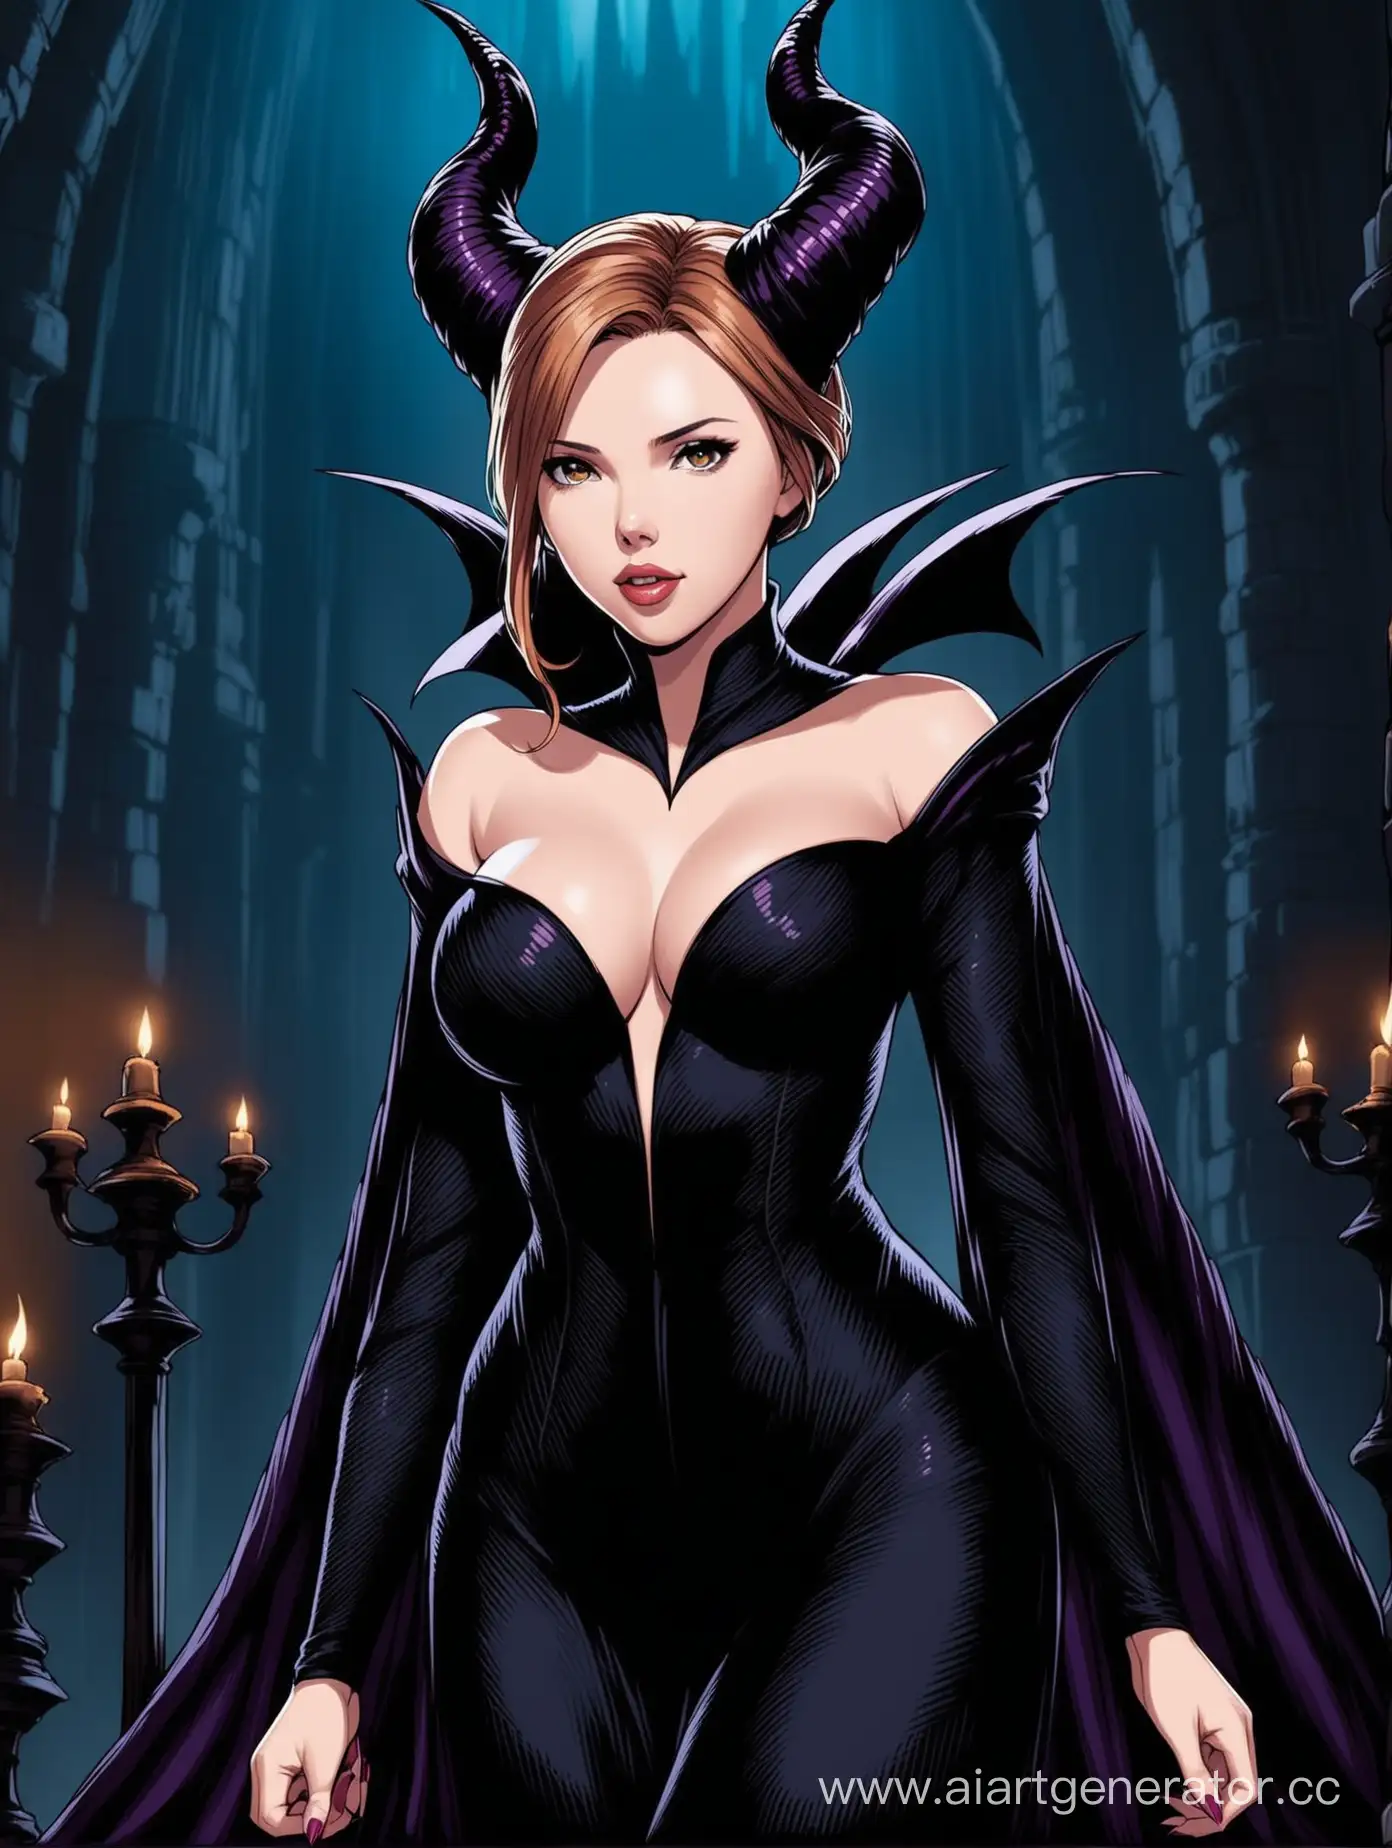 Curvaceous-Maleficent-Inspired-by-Scarlett-Johansson